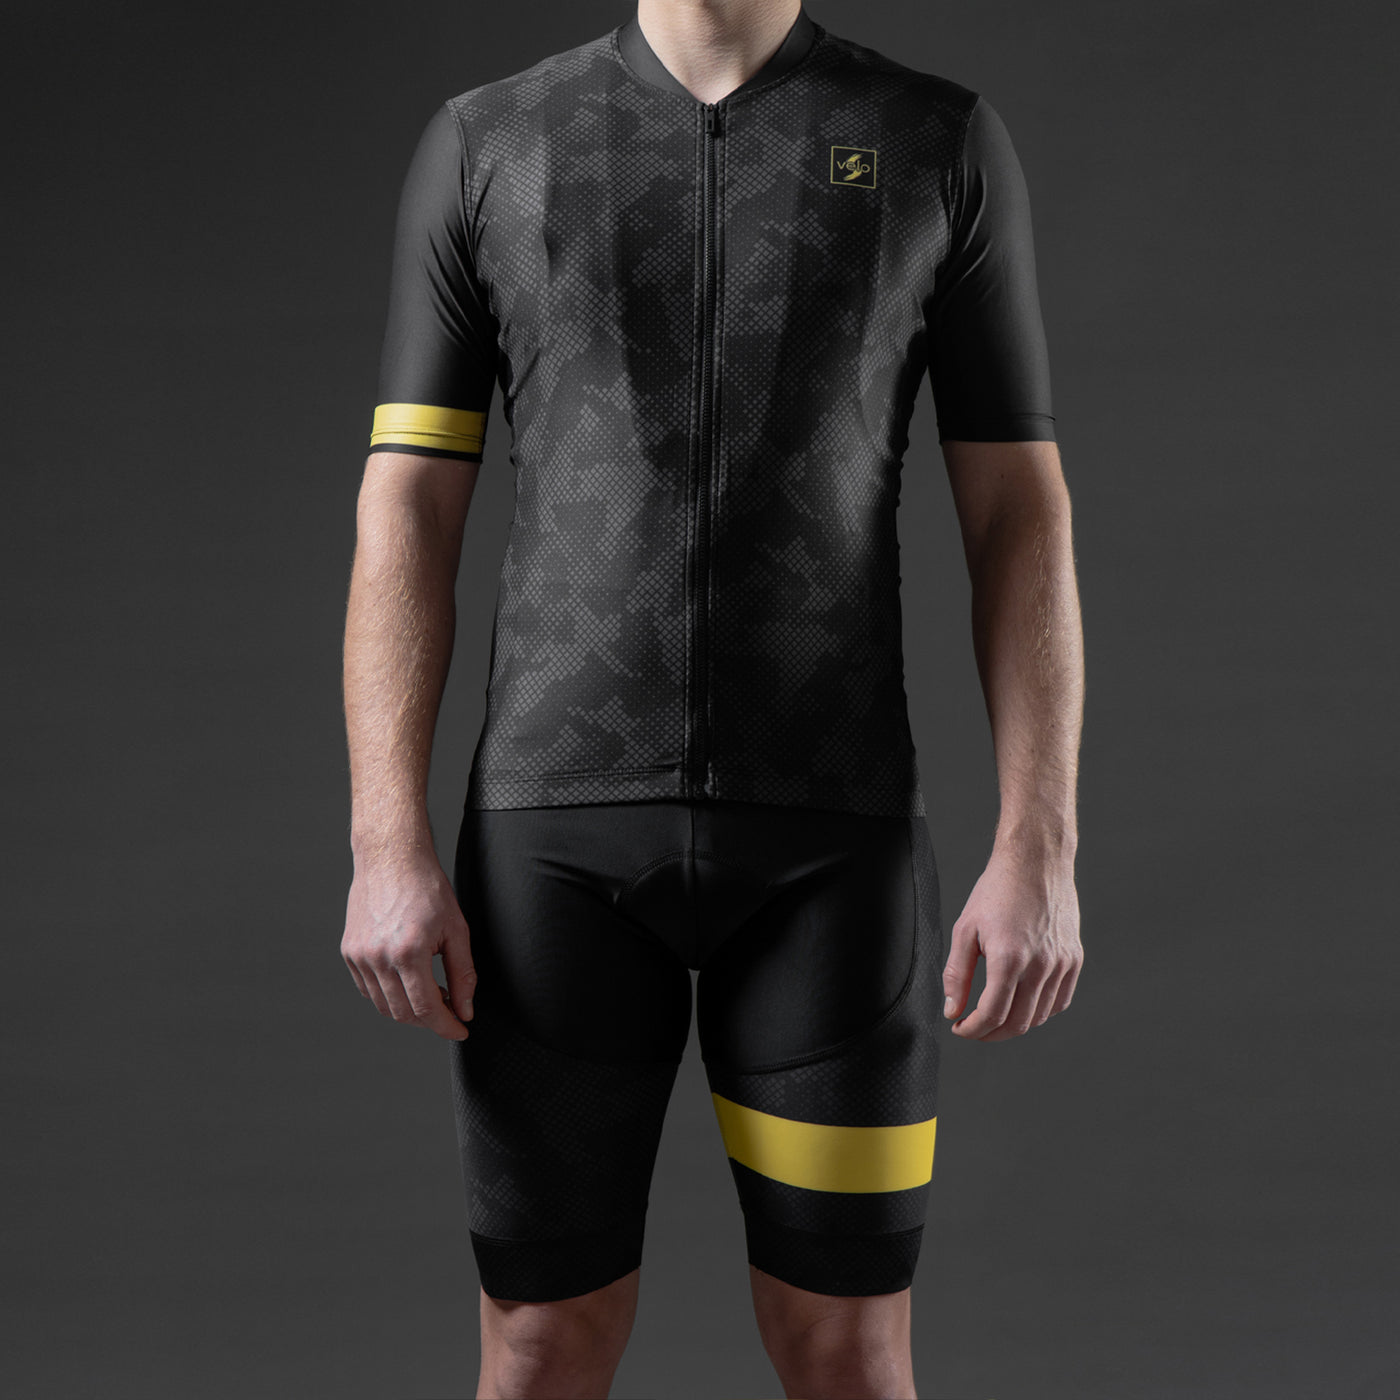 Men's cycling jersey Yellow lines